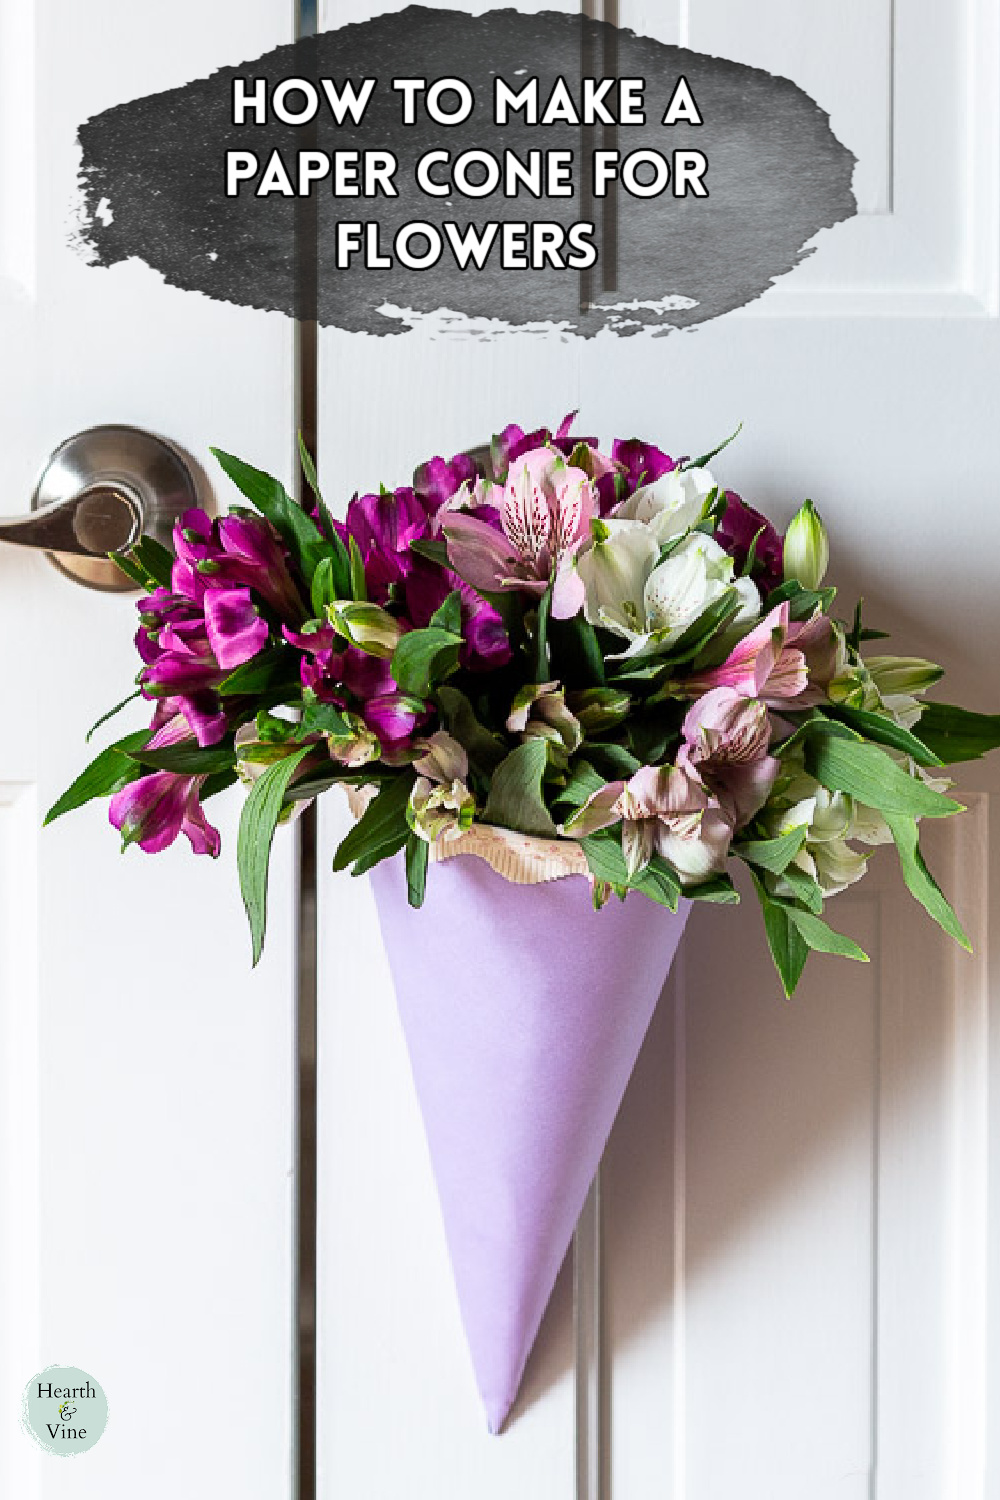 A lavender paper cone with pink ribbon edging holding a large bouquet of flowers hanging on a white door.